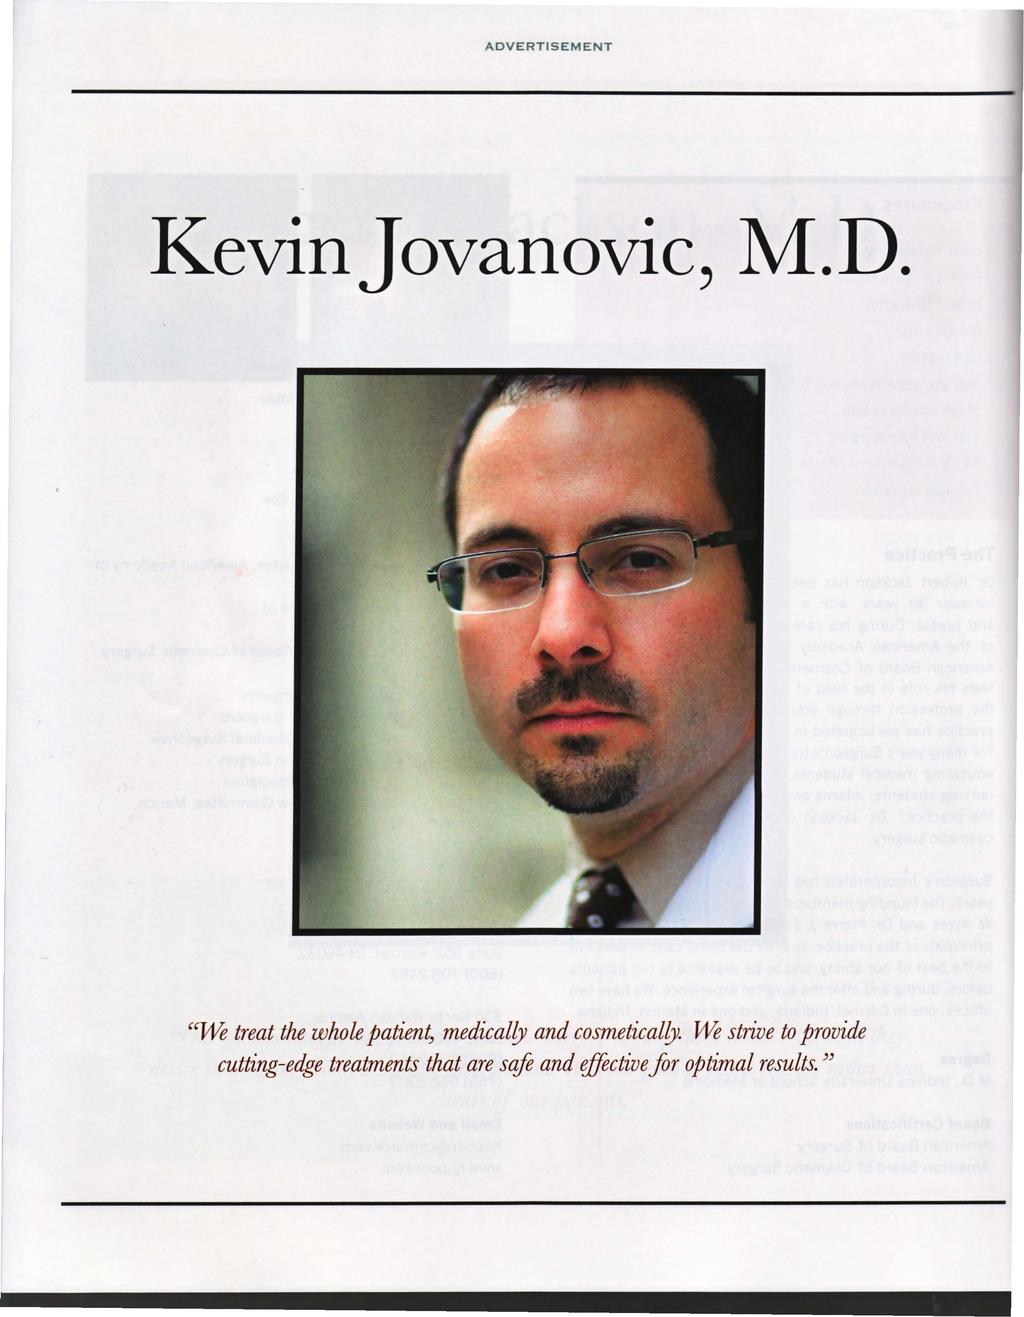 ADVERTISEMENT KevinJovanovic, M.D. "Ute treat the whole patien~ medically and cosmetically.